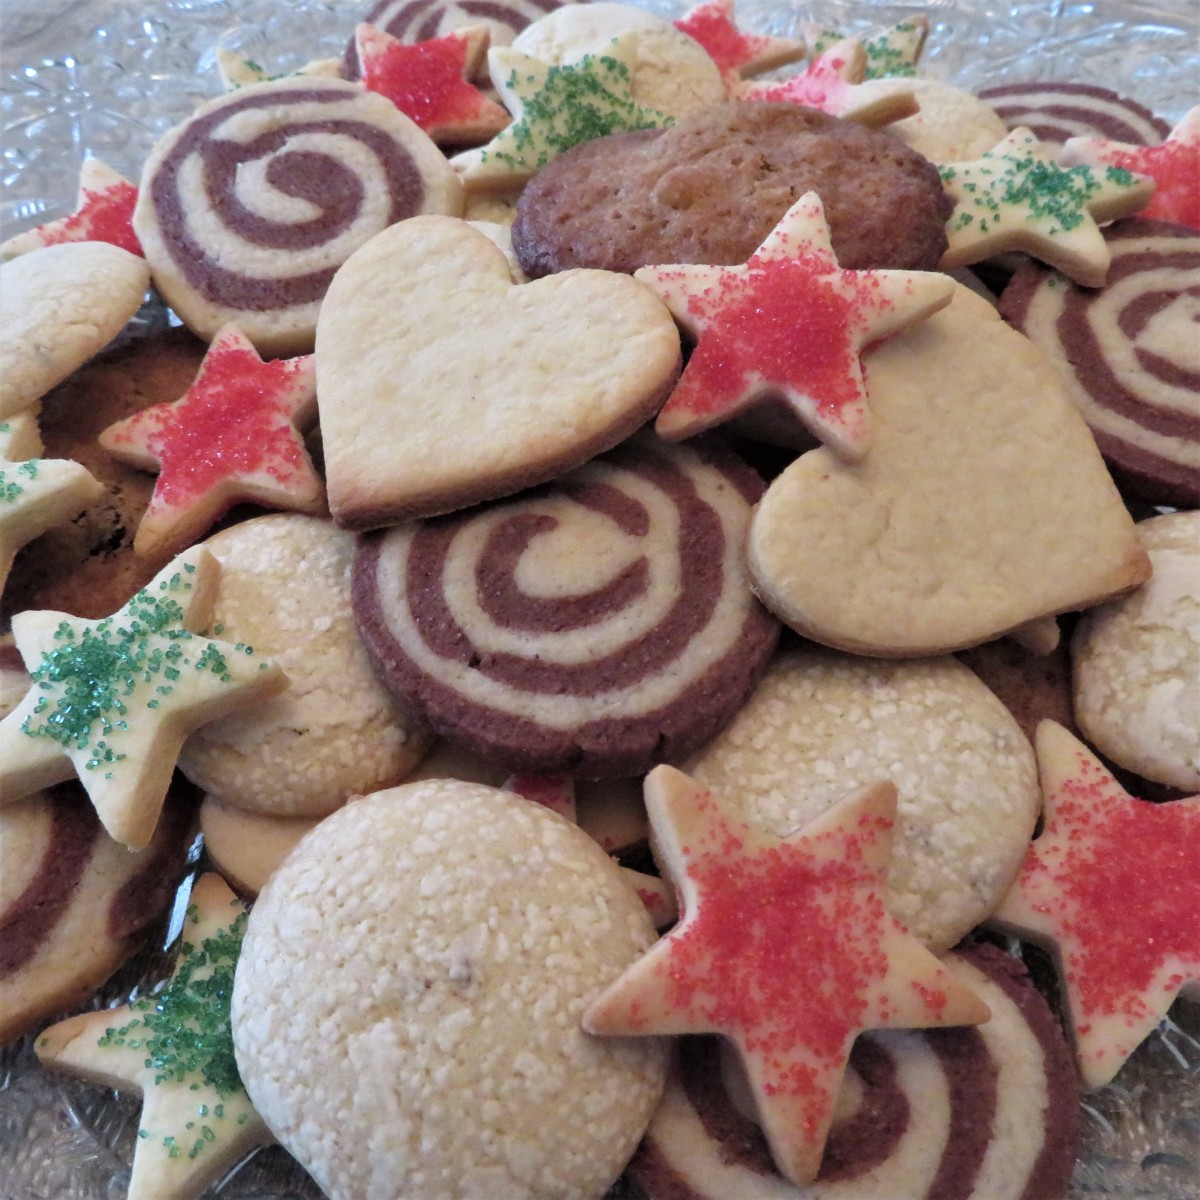 Plate with the mixture of five different kinds of cookies